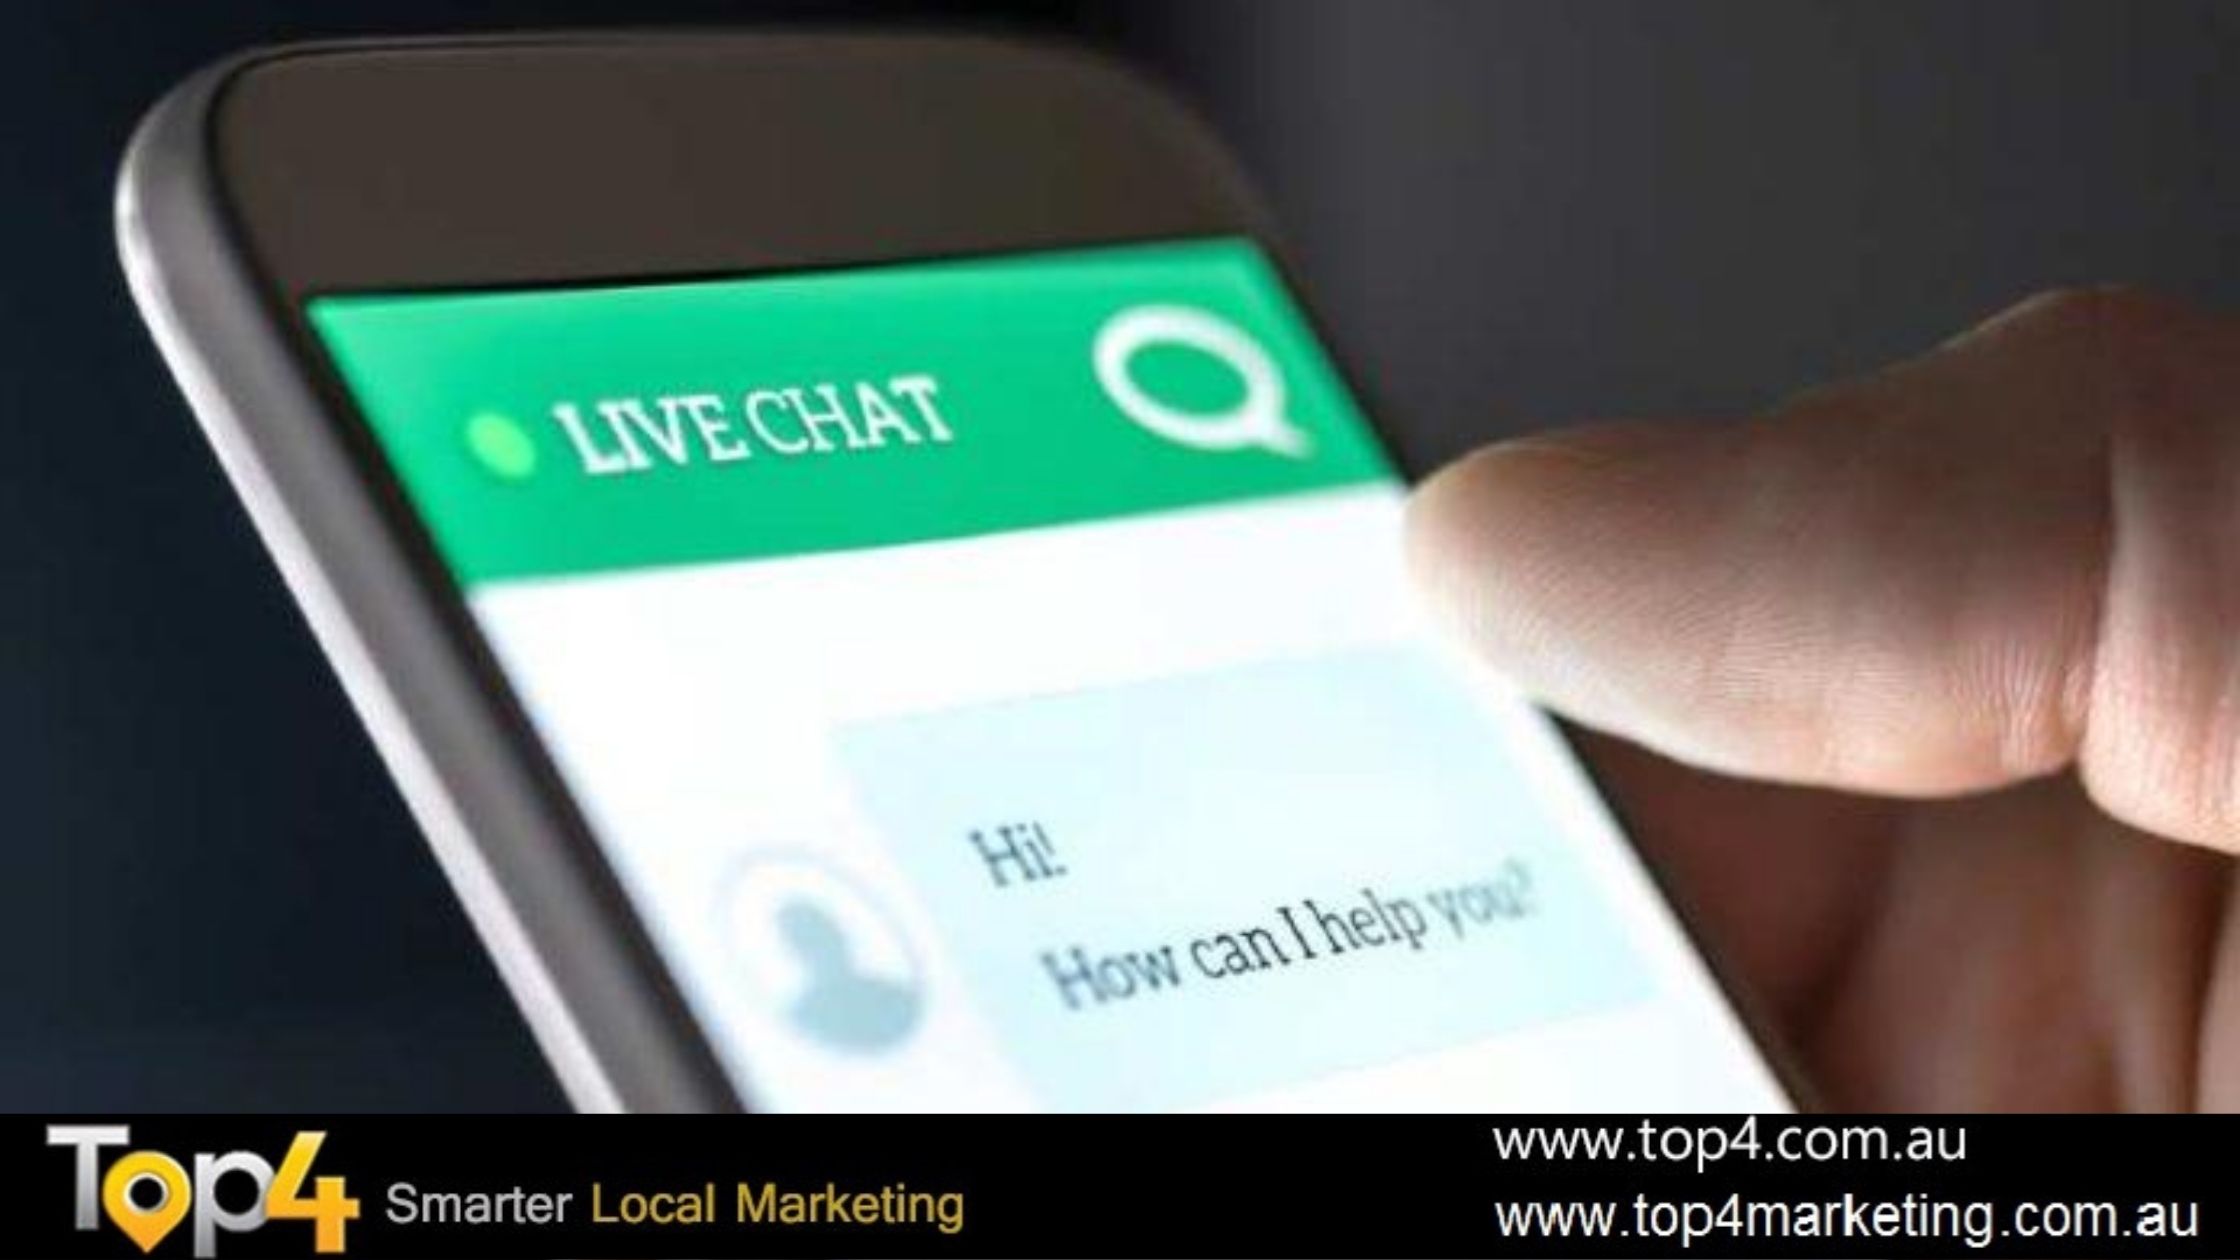 Live chat - Top4 Marketing